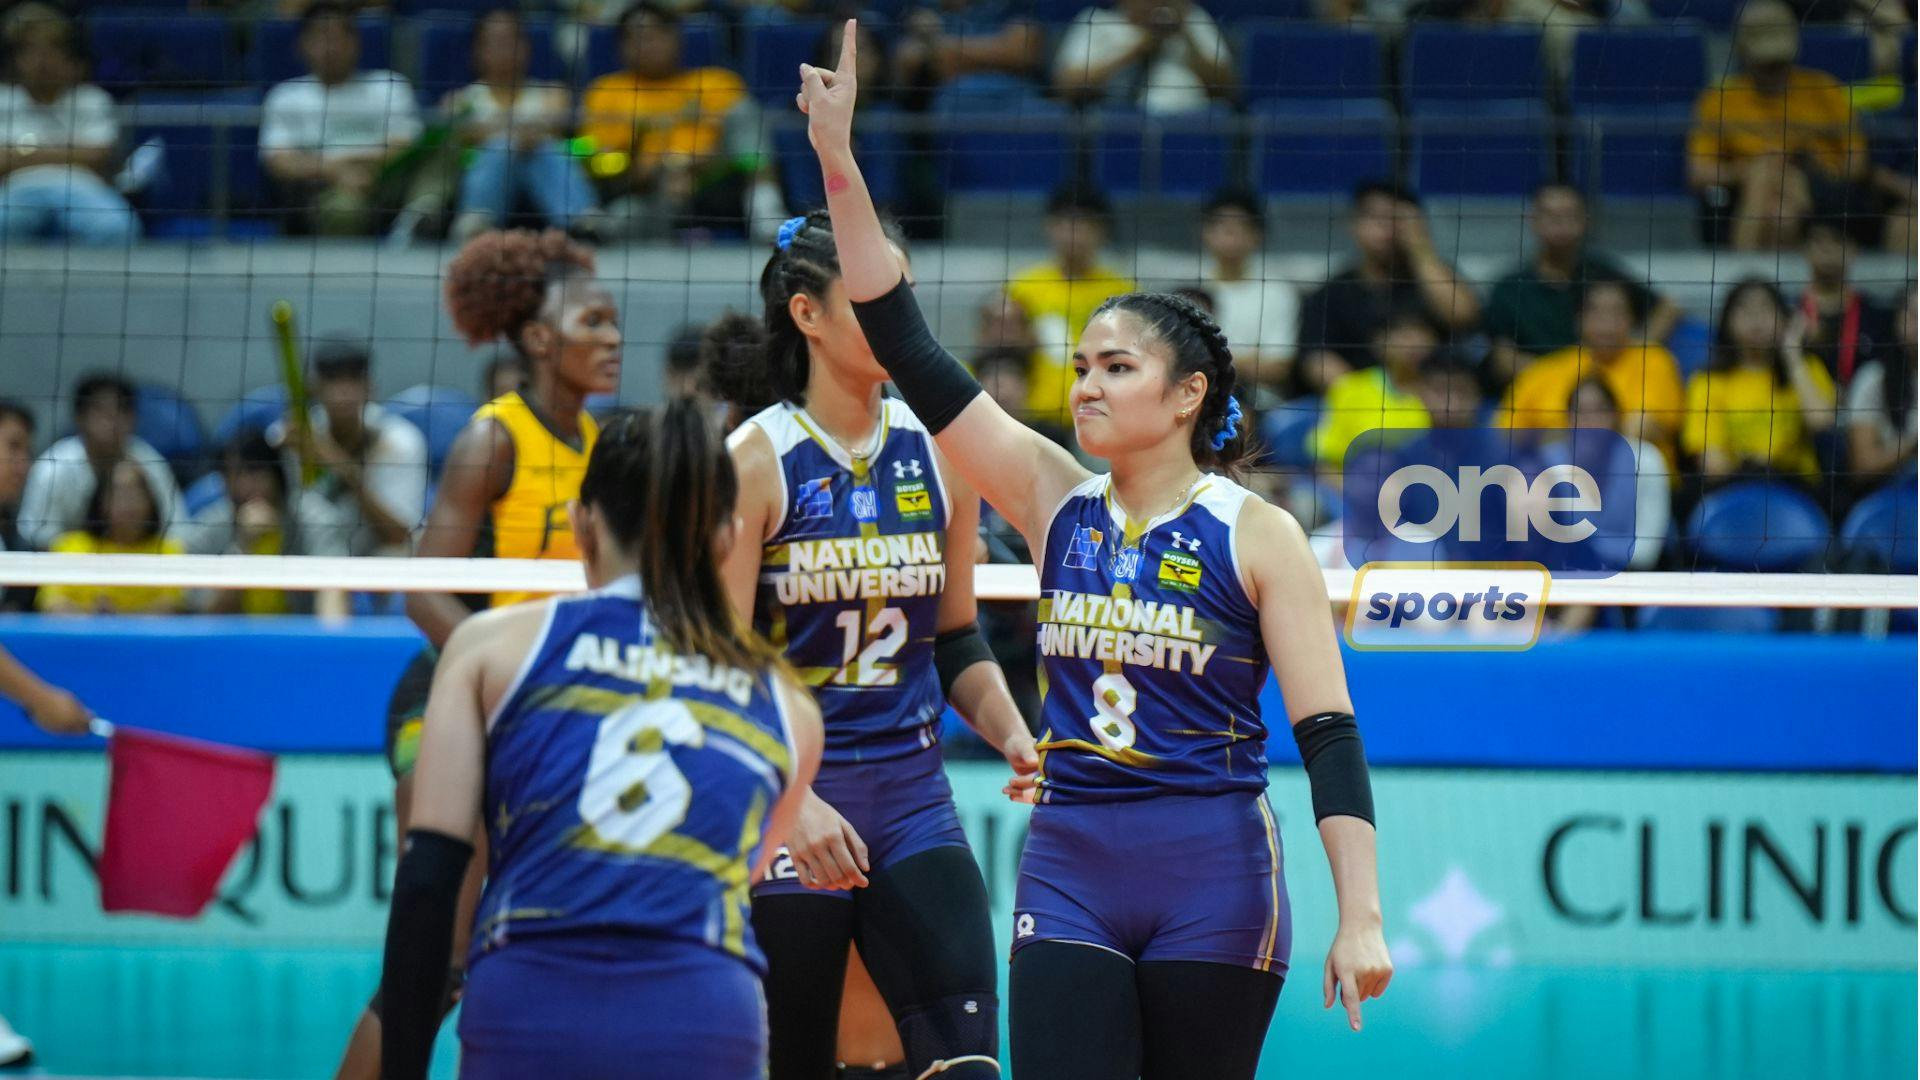 "Gagawin na namin lahat" | Birthday girl Sheena Toring turns in inspired performance to help NU reach UAAP Finals